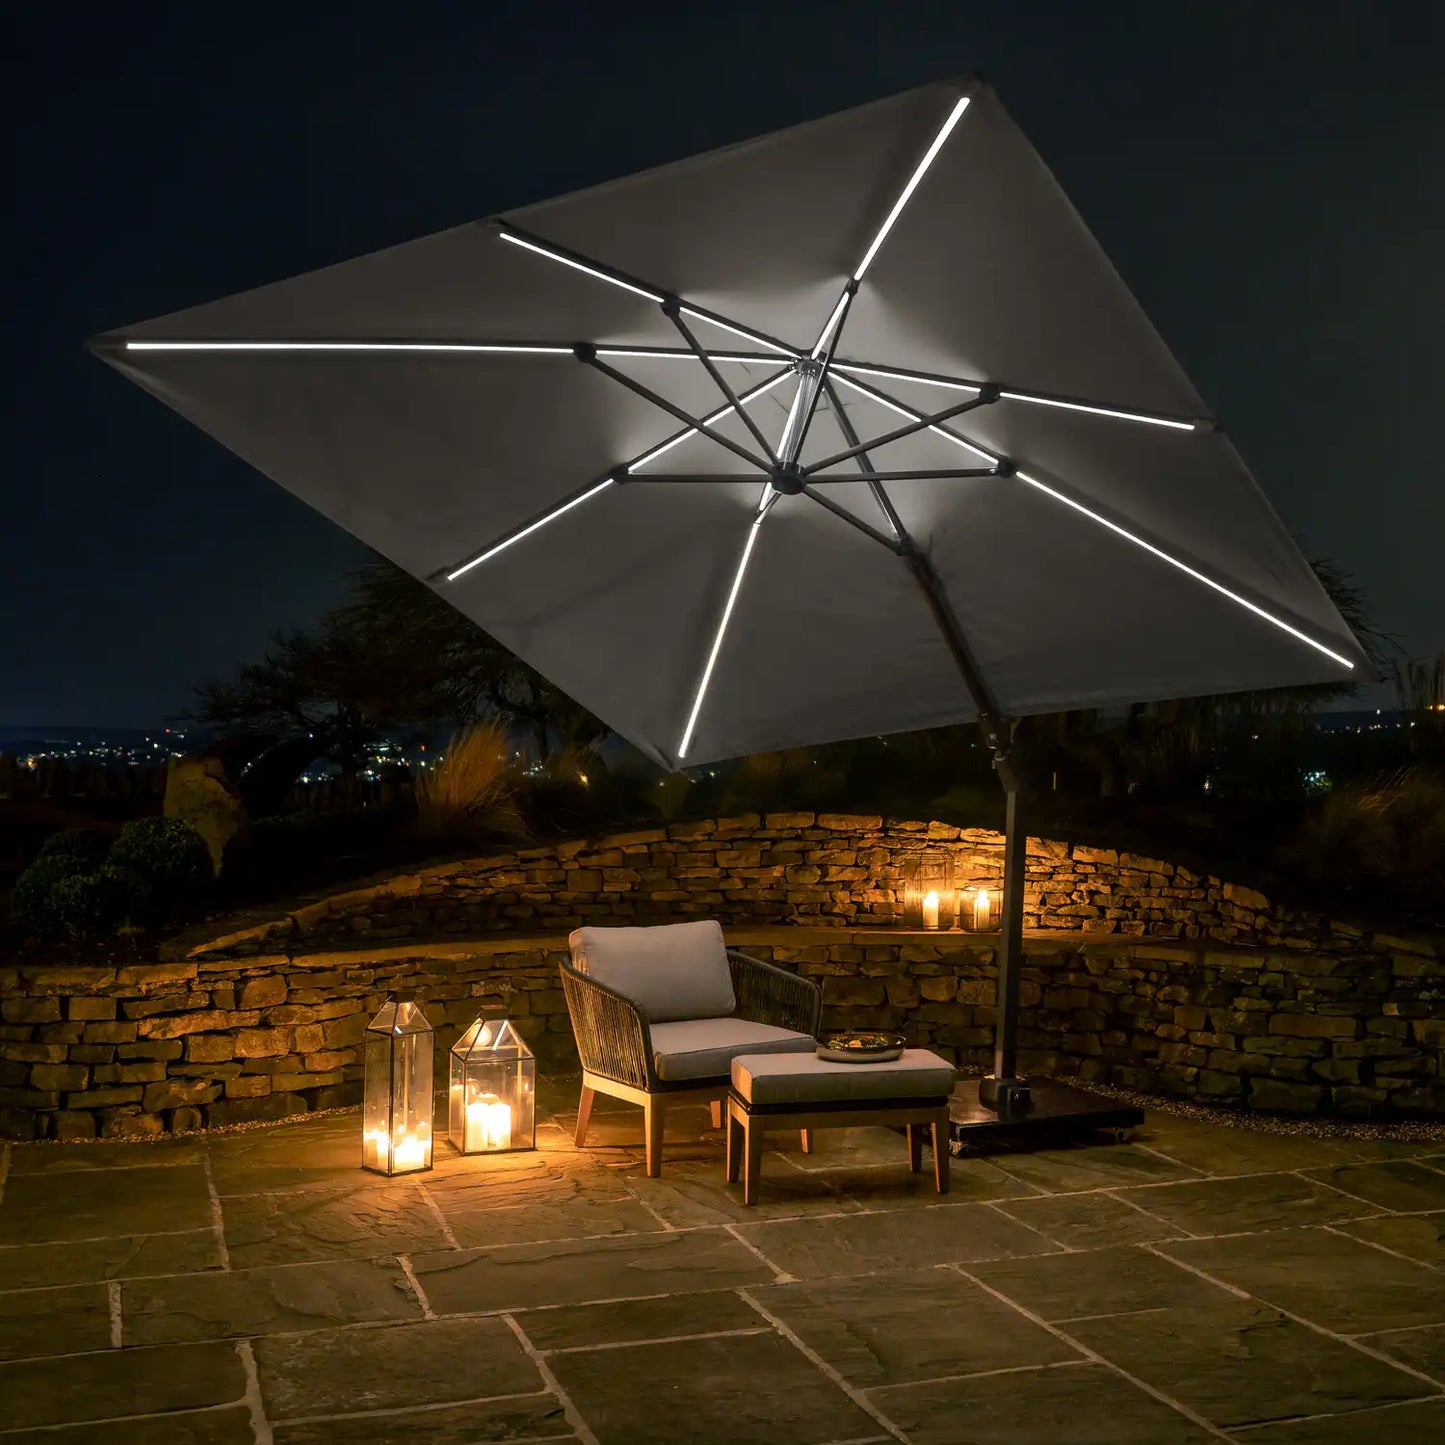 Platinum Challenger T2 Glow 3m Square Cantilever Parasol in Luna Grey – Click Style